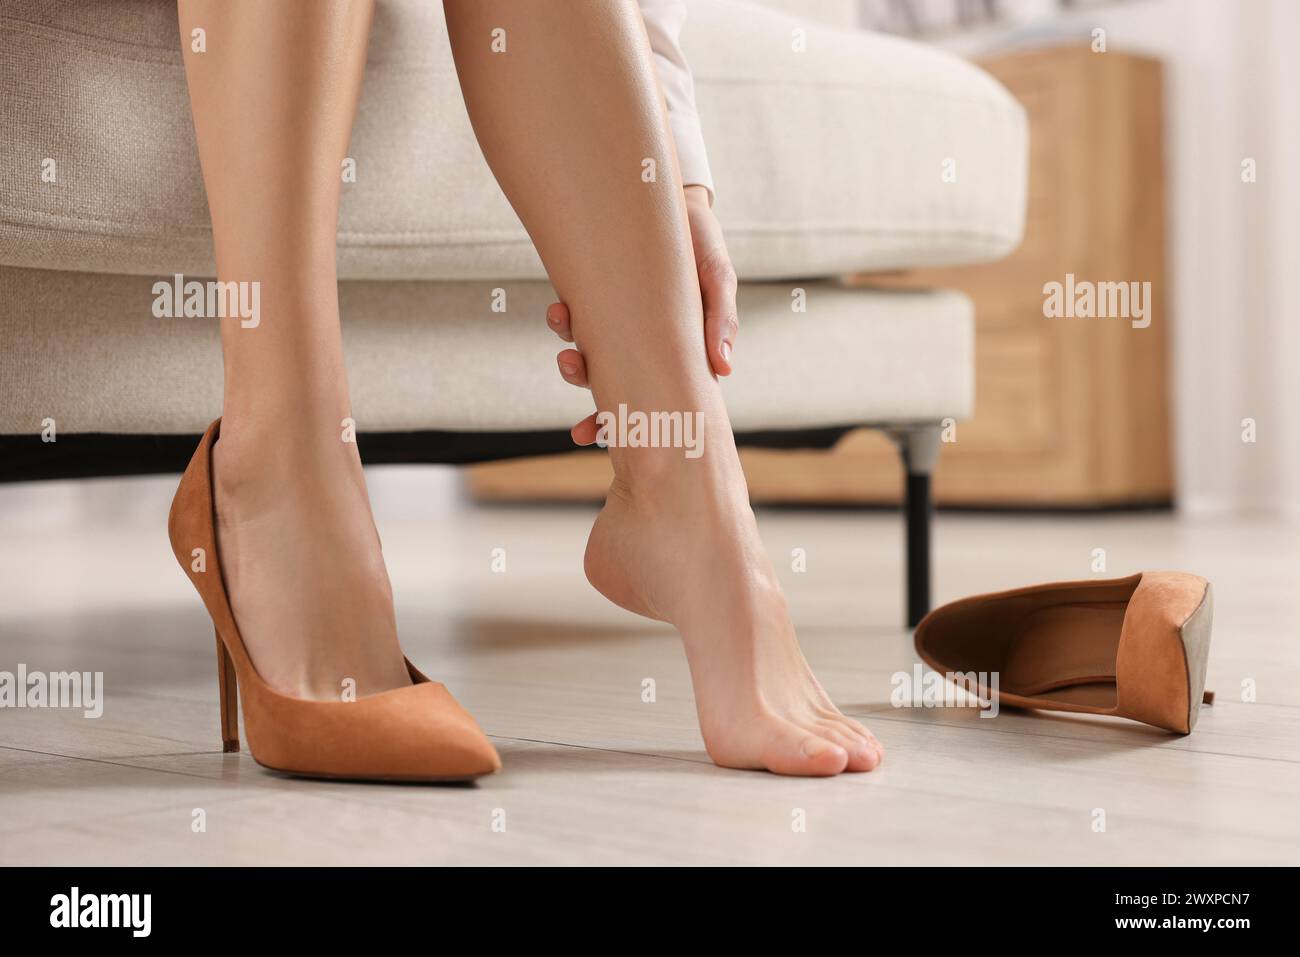 Woman suffering from leg pain after wearing high heels at home, closeup Stock Photo